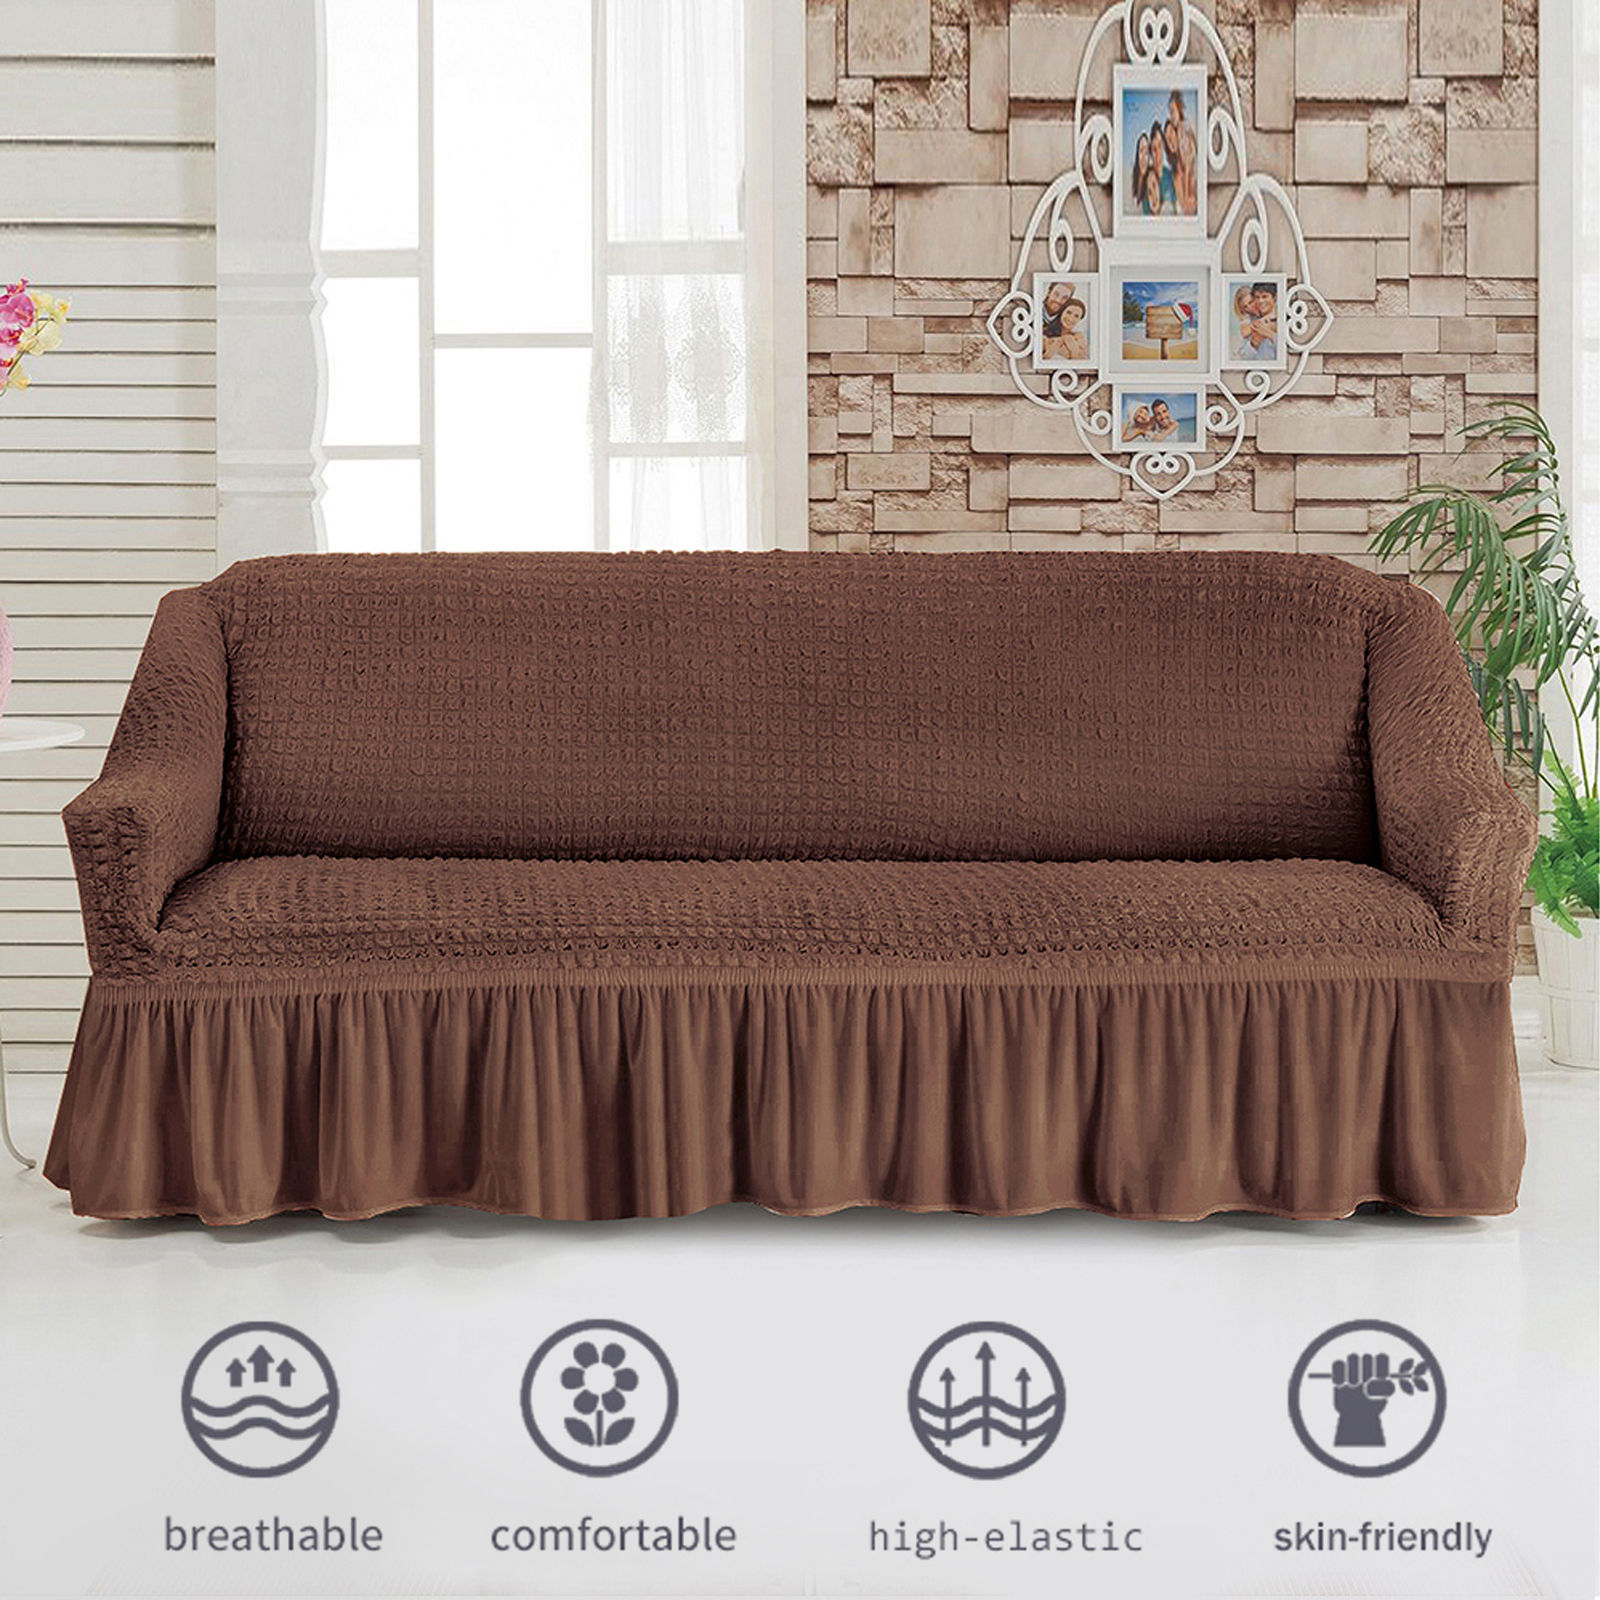 Stretch Sofa Slipcover, 3 Seater Sofa Slipcovers With Skirt With Armless Soft Sofa Cover Elastic Straps Sofa Slipcover For Living Room Kids Pets-Brown B-X-Large